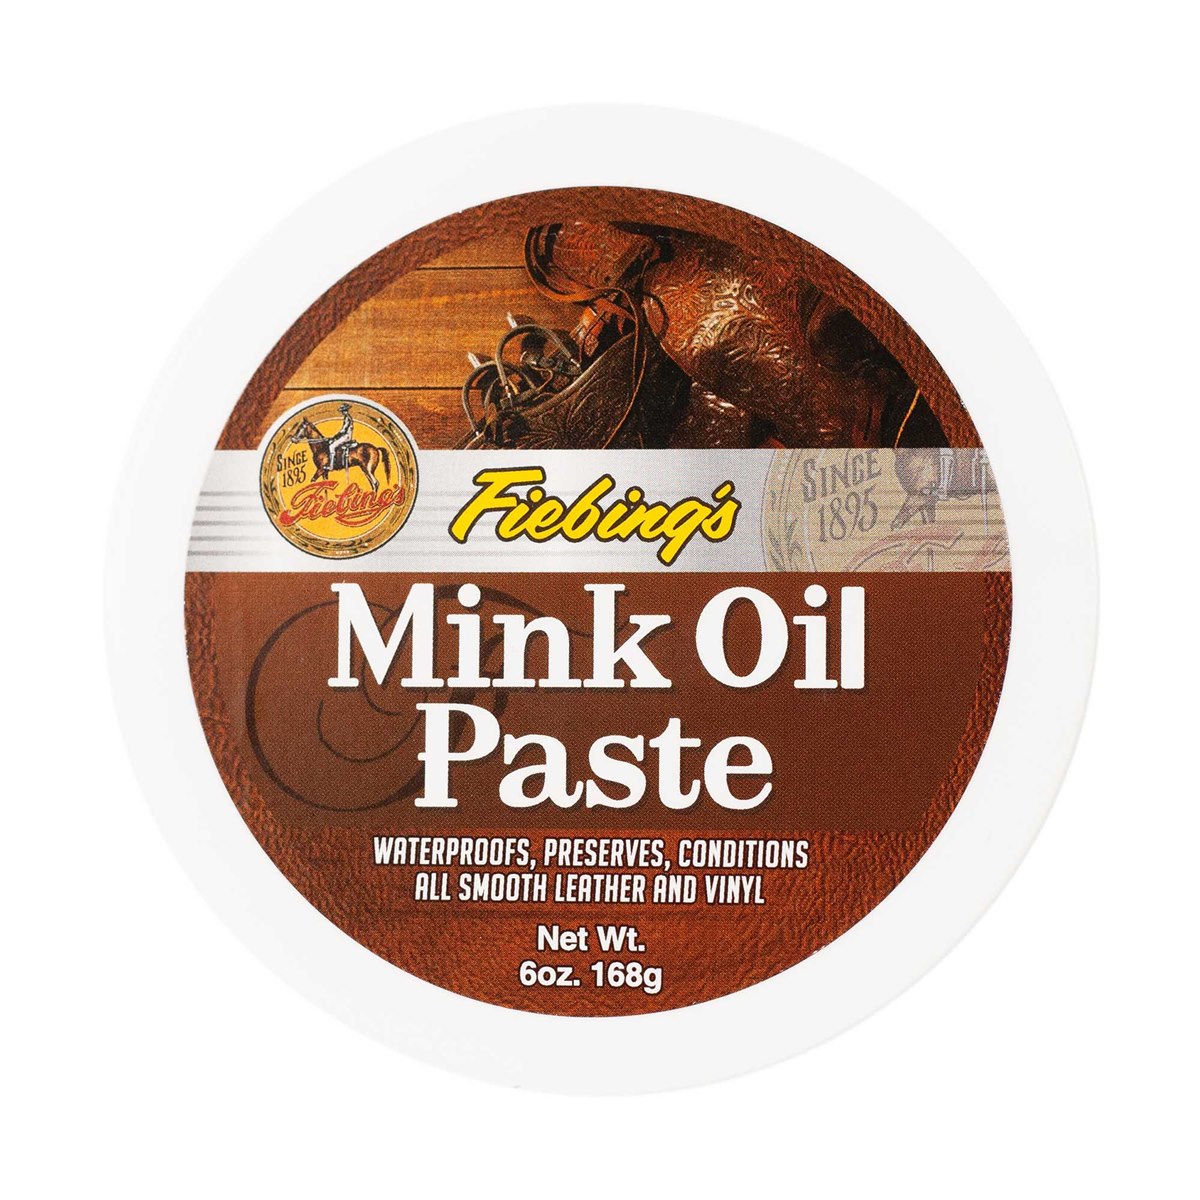 Mink Oil Paste for Waterproofing Leather